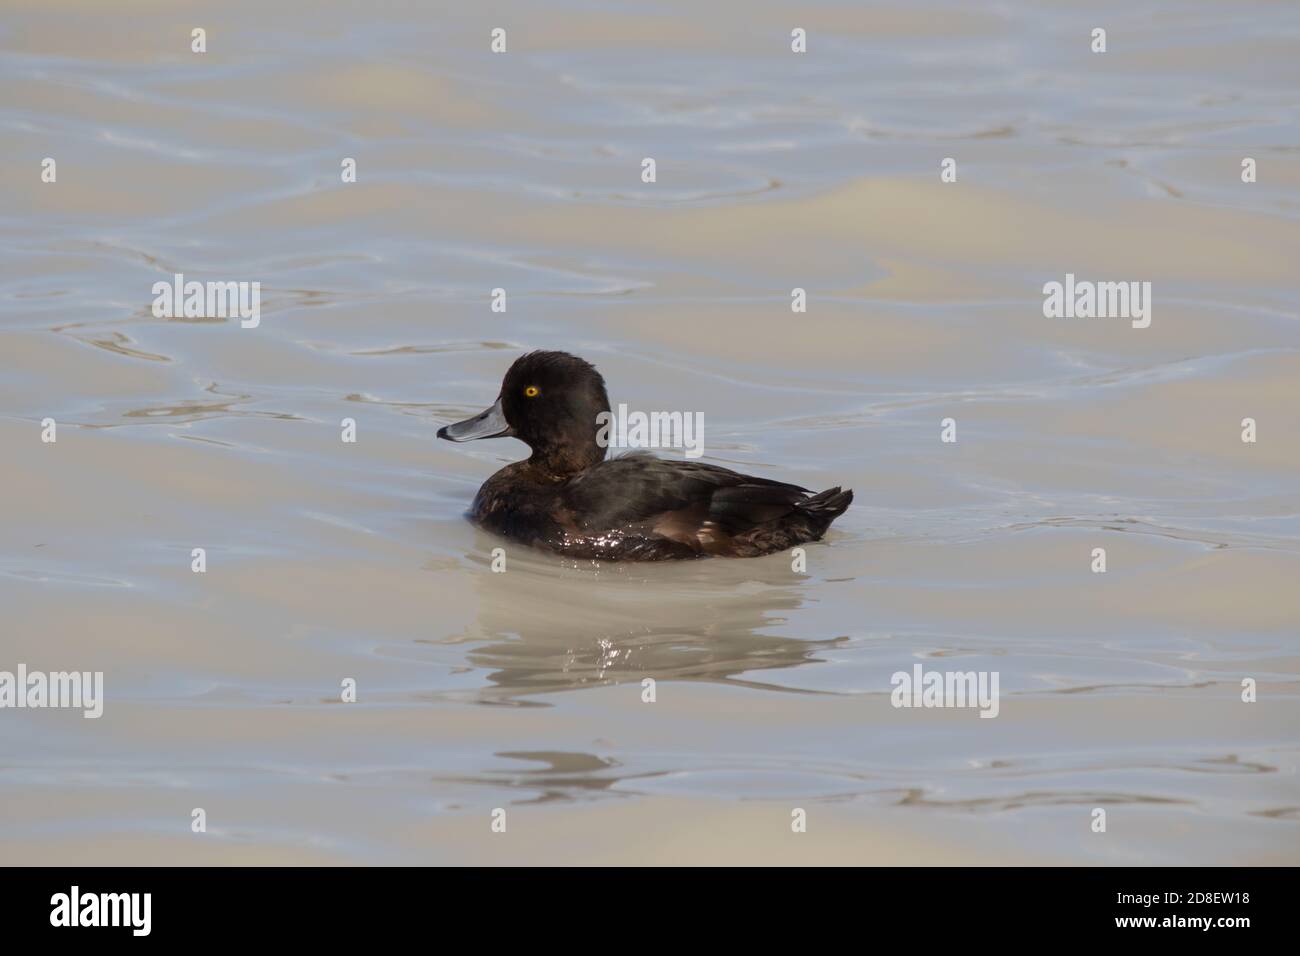 The New Zealand Scaup (Aythya novaeseelandiae) commonly known as a Black Teal, is a diving duck species of the genus Aythya. Stock Photo